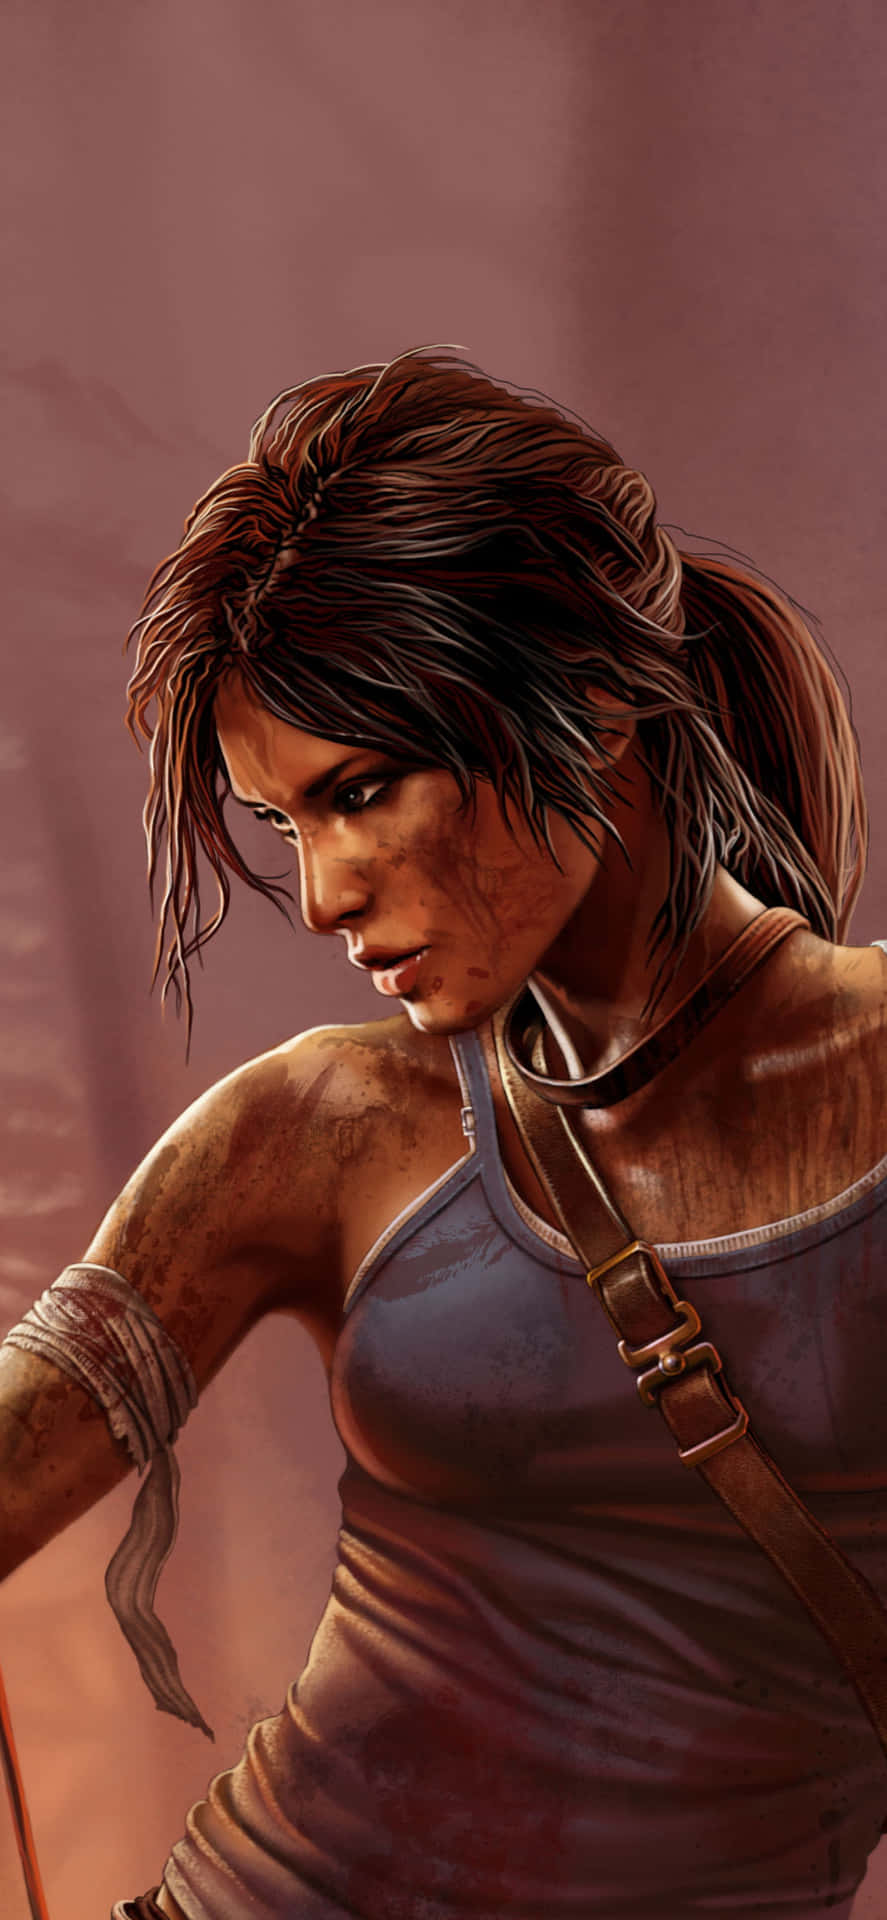 Android Rise Of The Tomb Raider Background Shoulder